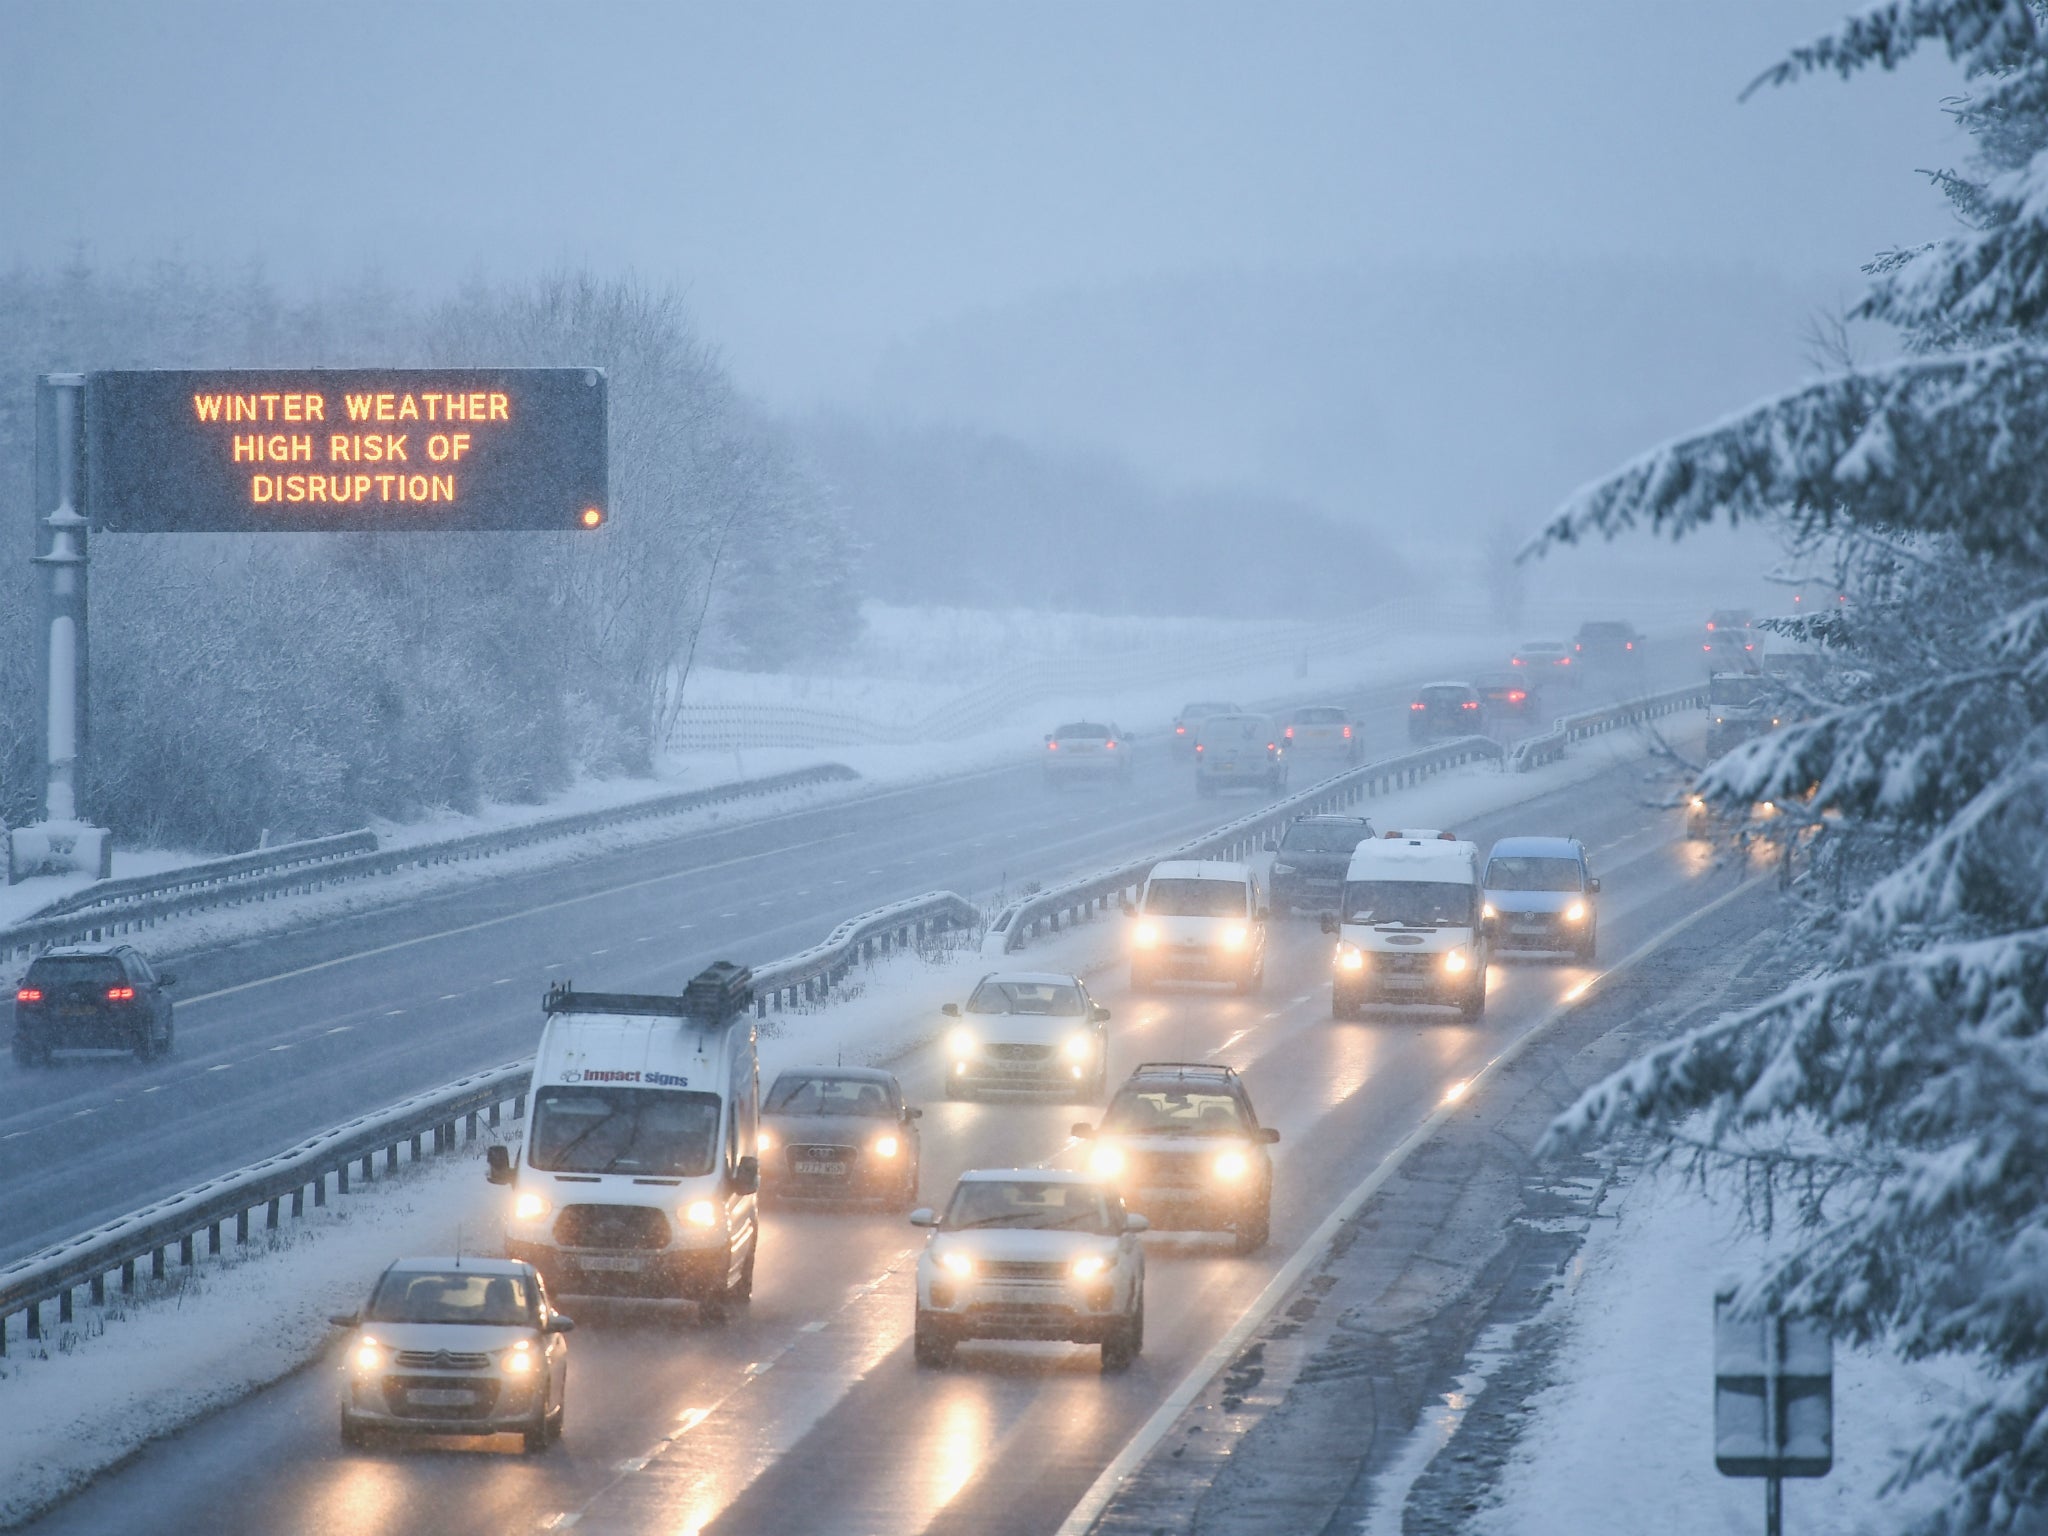 The snow comes after parts of the country suffered a deluge during January